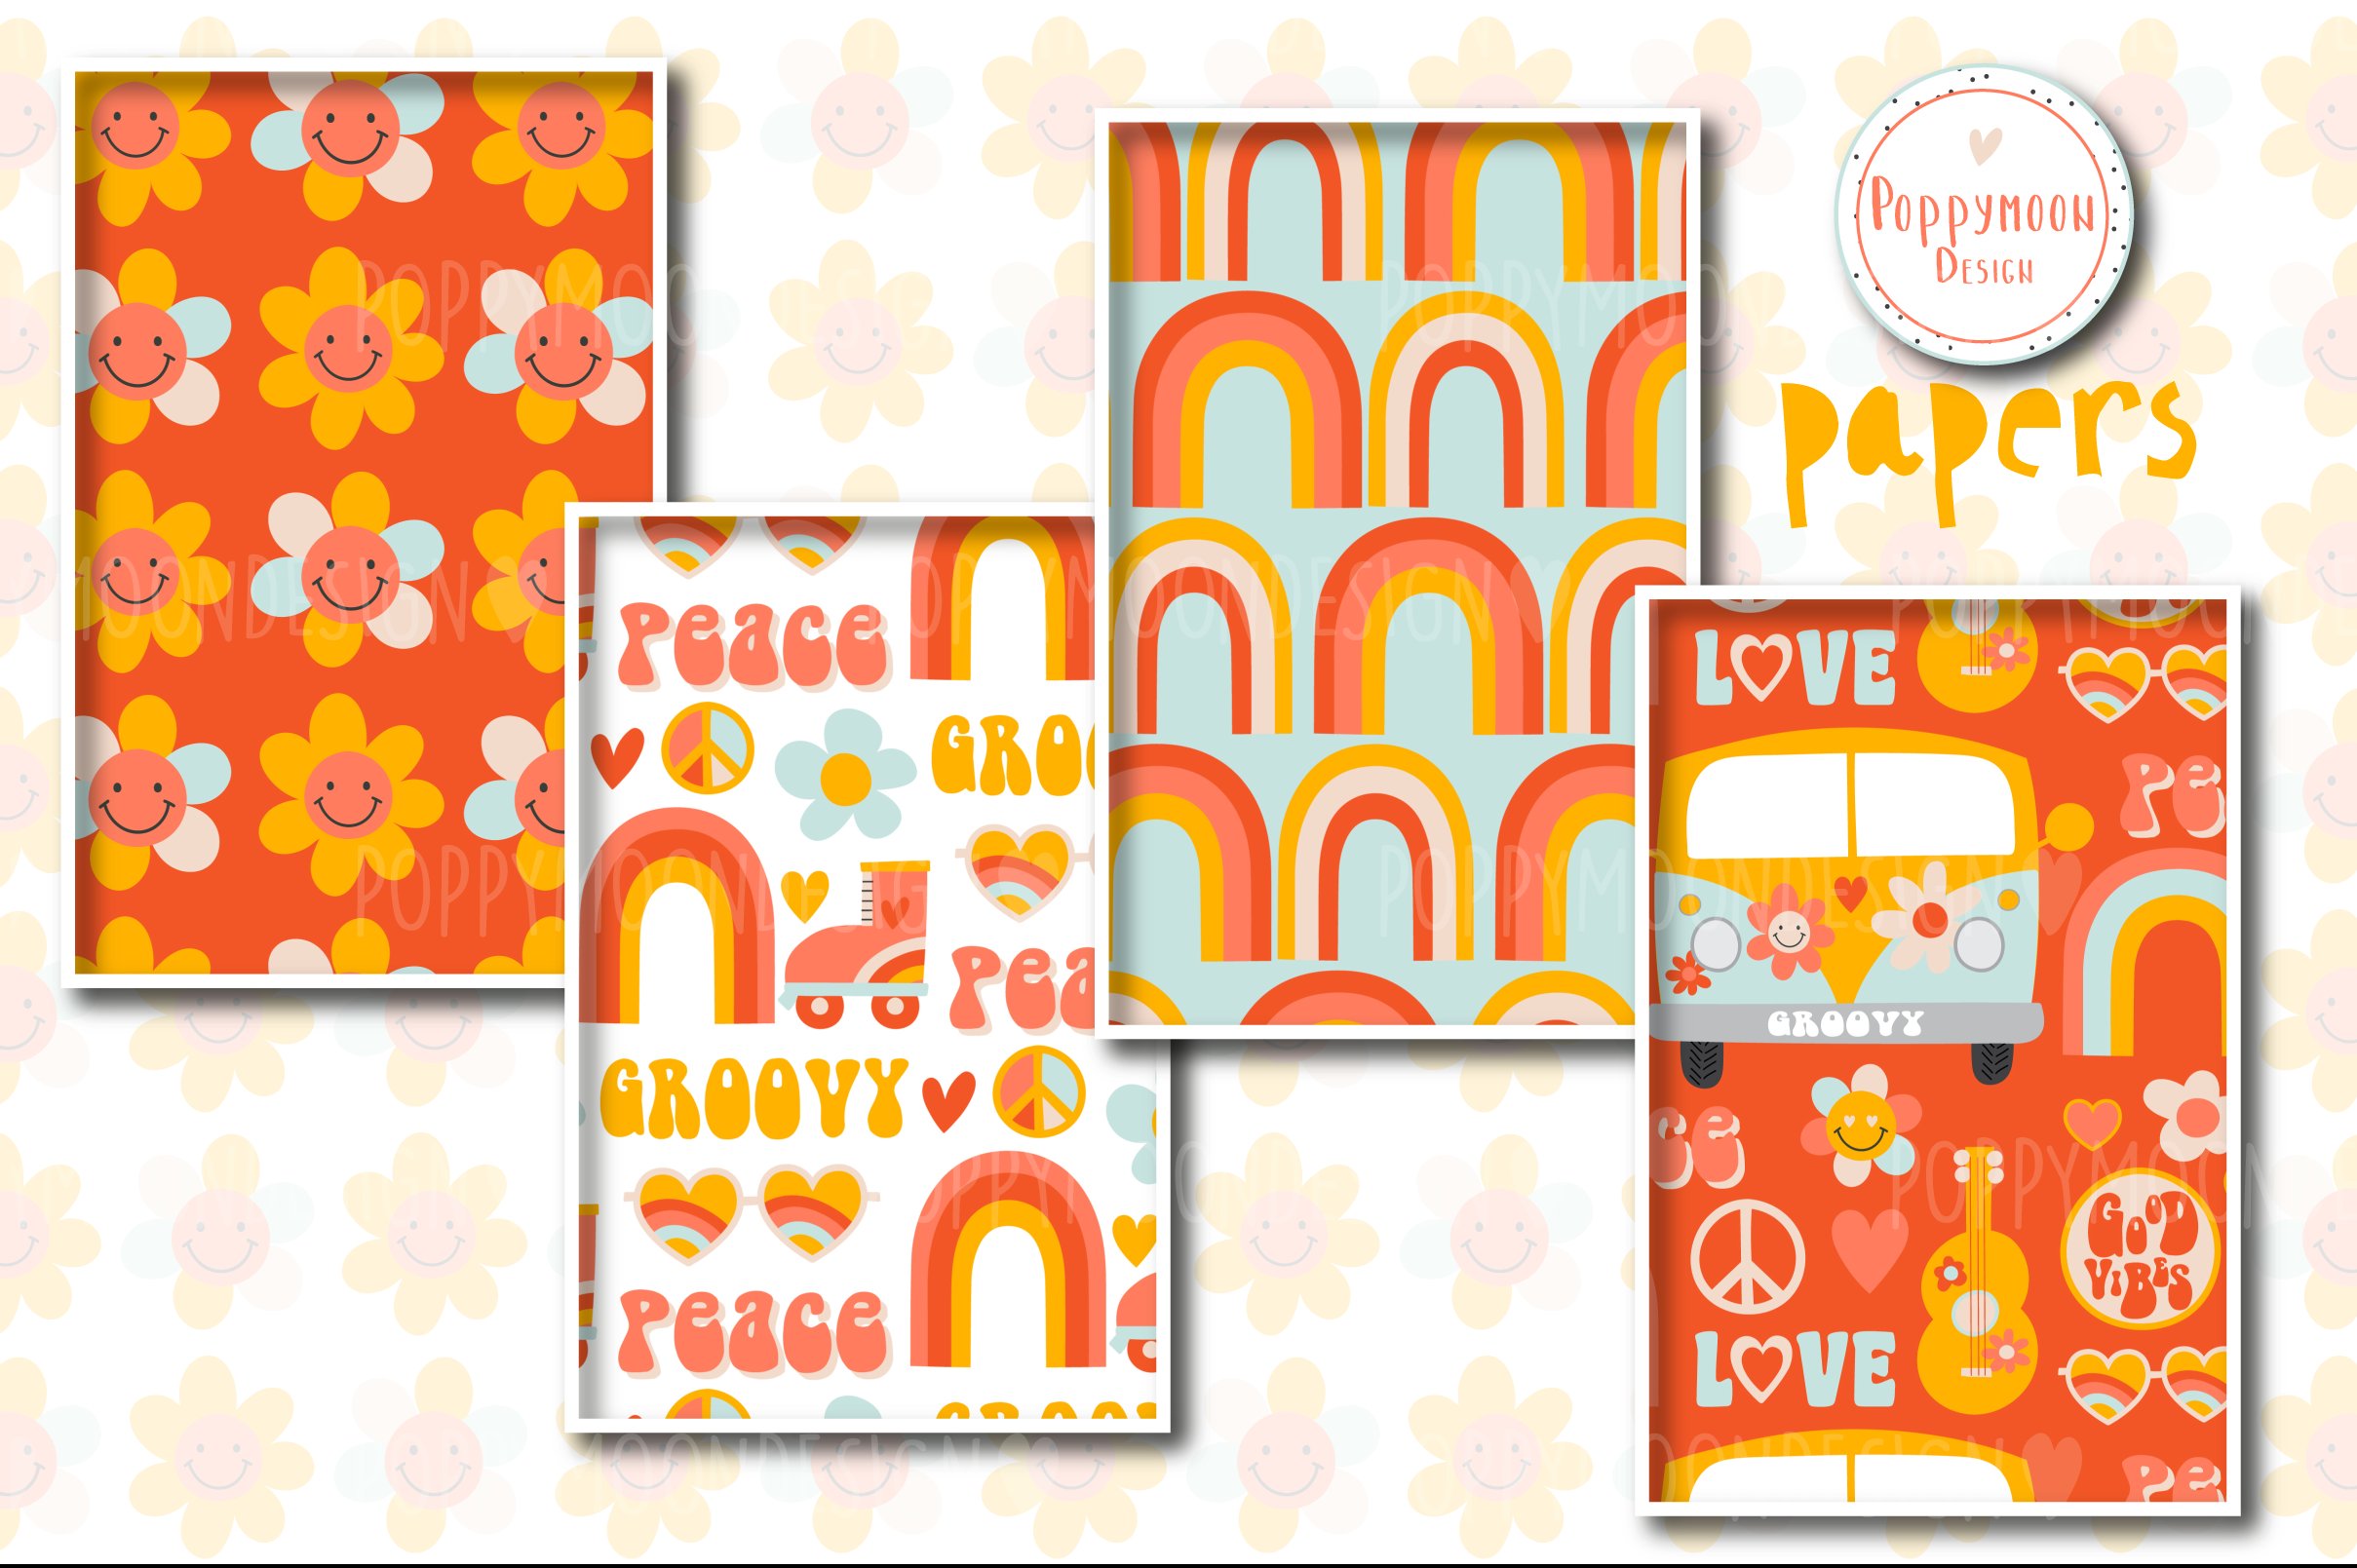 Groovy paper set preview image.